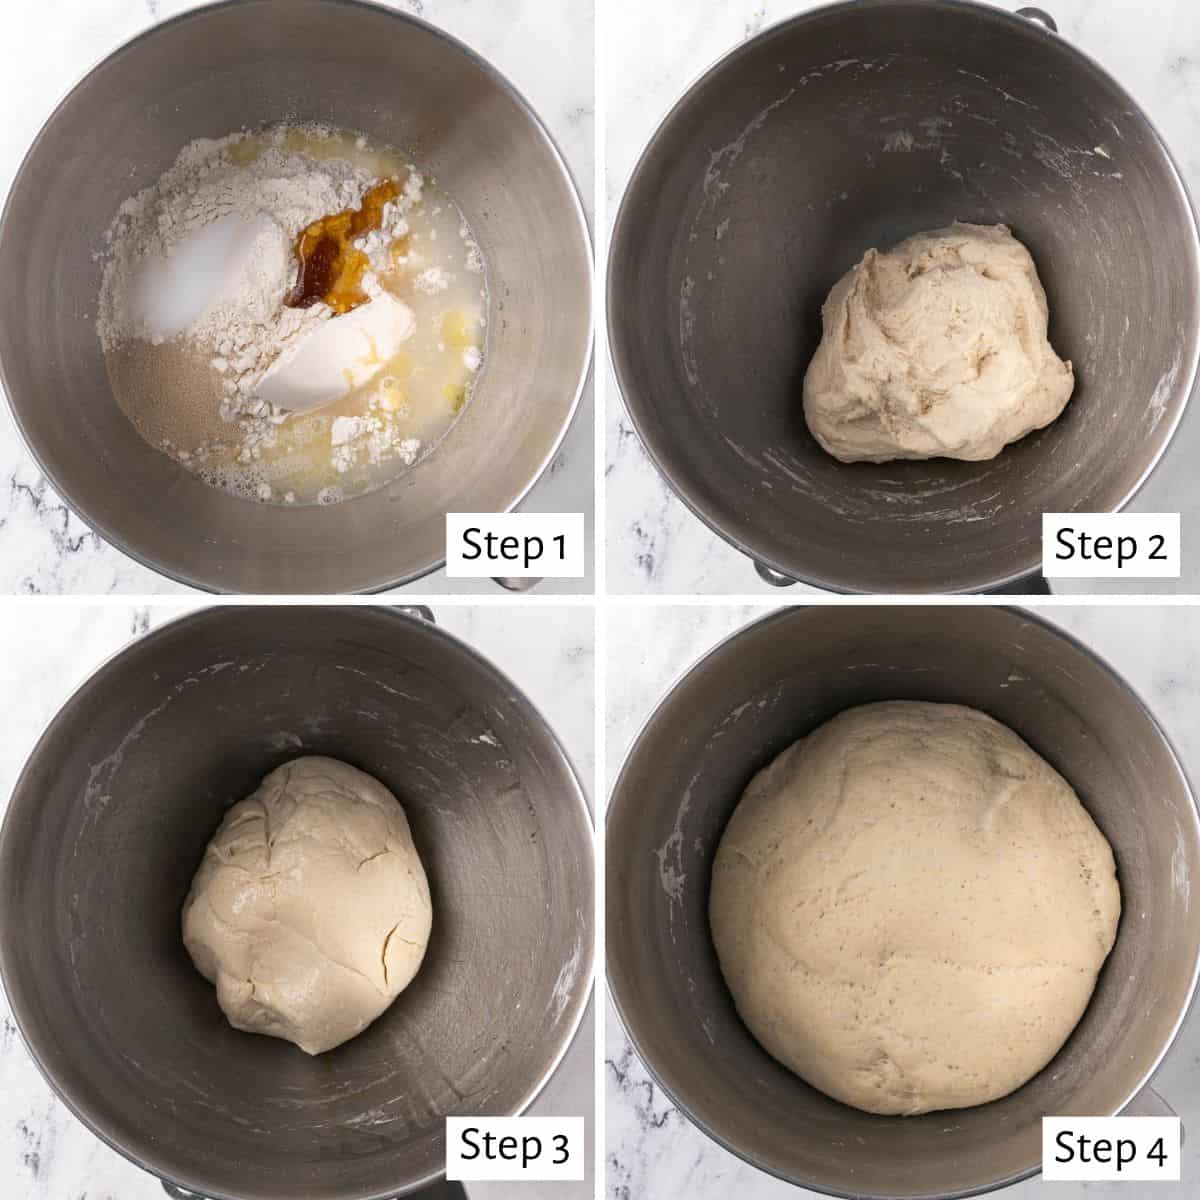 4 image collage making recipe in the bowl of a stand mixer: 1-water, yeast, sugar, oil, and honey added before mixing, 2- after mixing with flour added to show a round dough, 3- after kneading dough and resting in the bowl, coated with oil before rising, 4- after doubling in size.